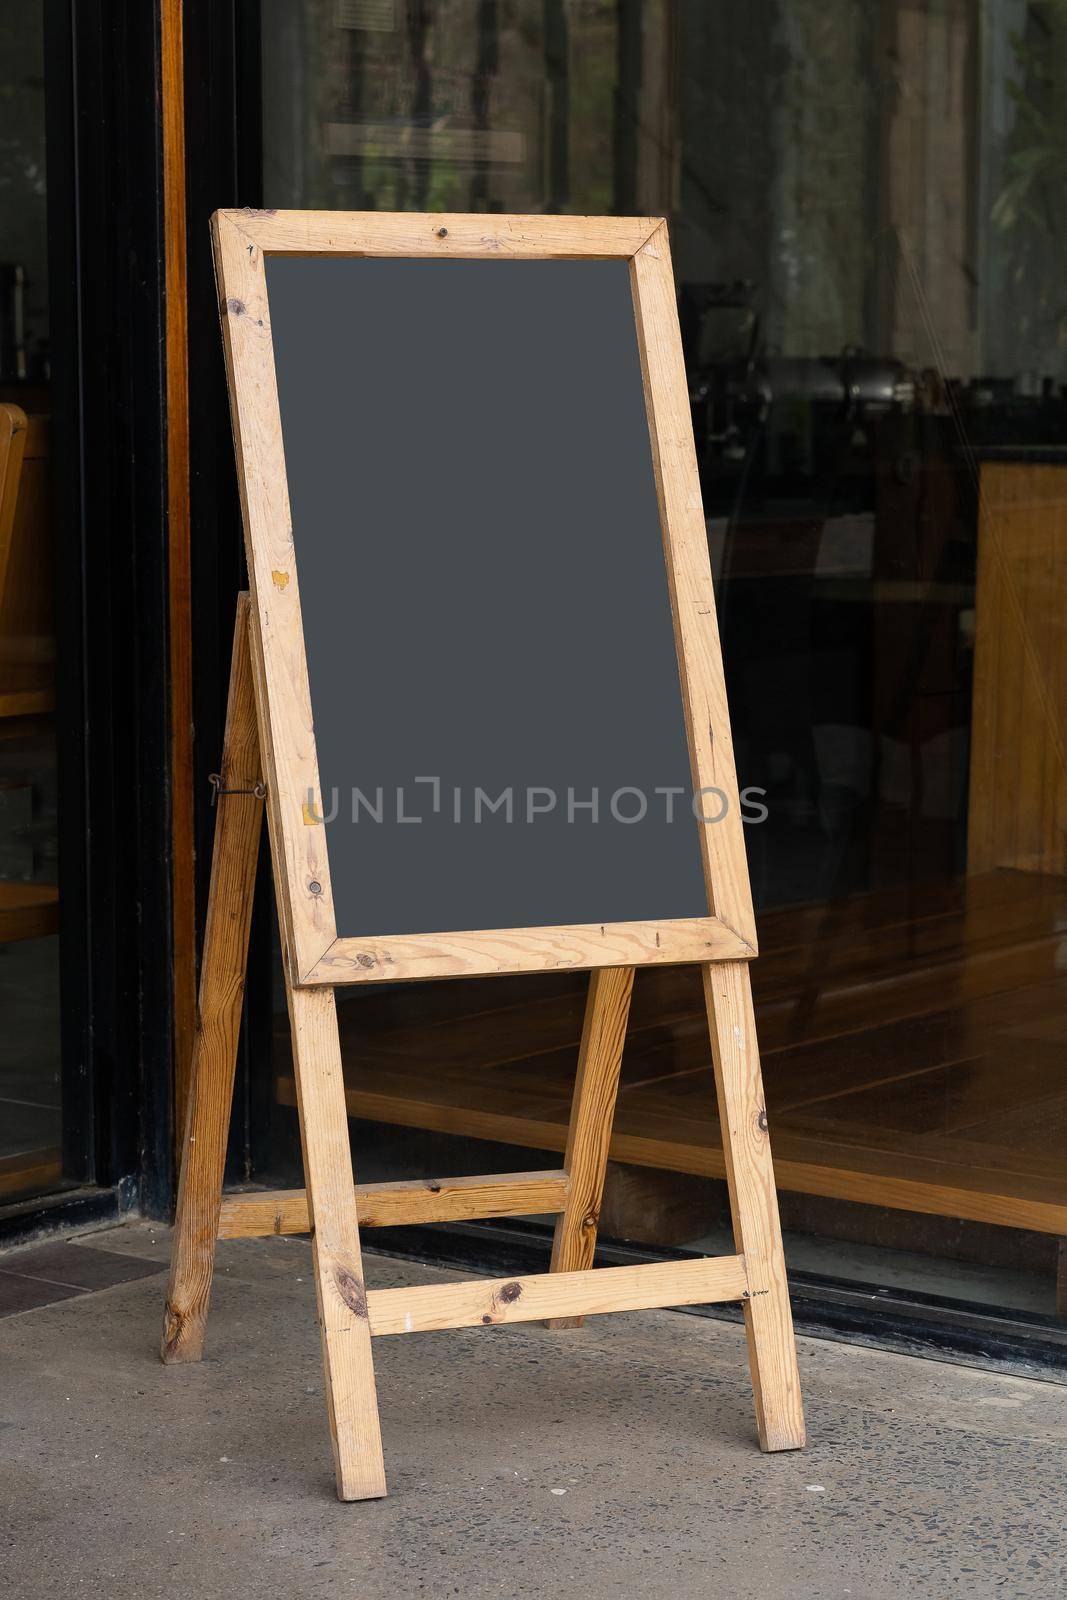 Old whiteboard stand in front of restaurant by smuay